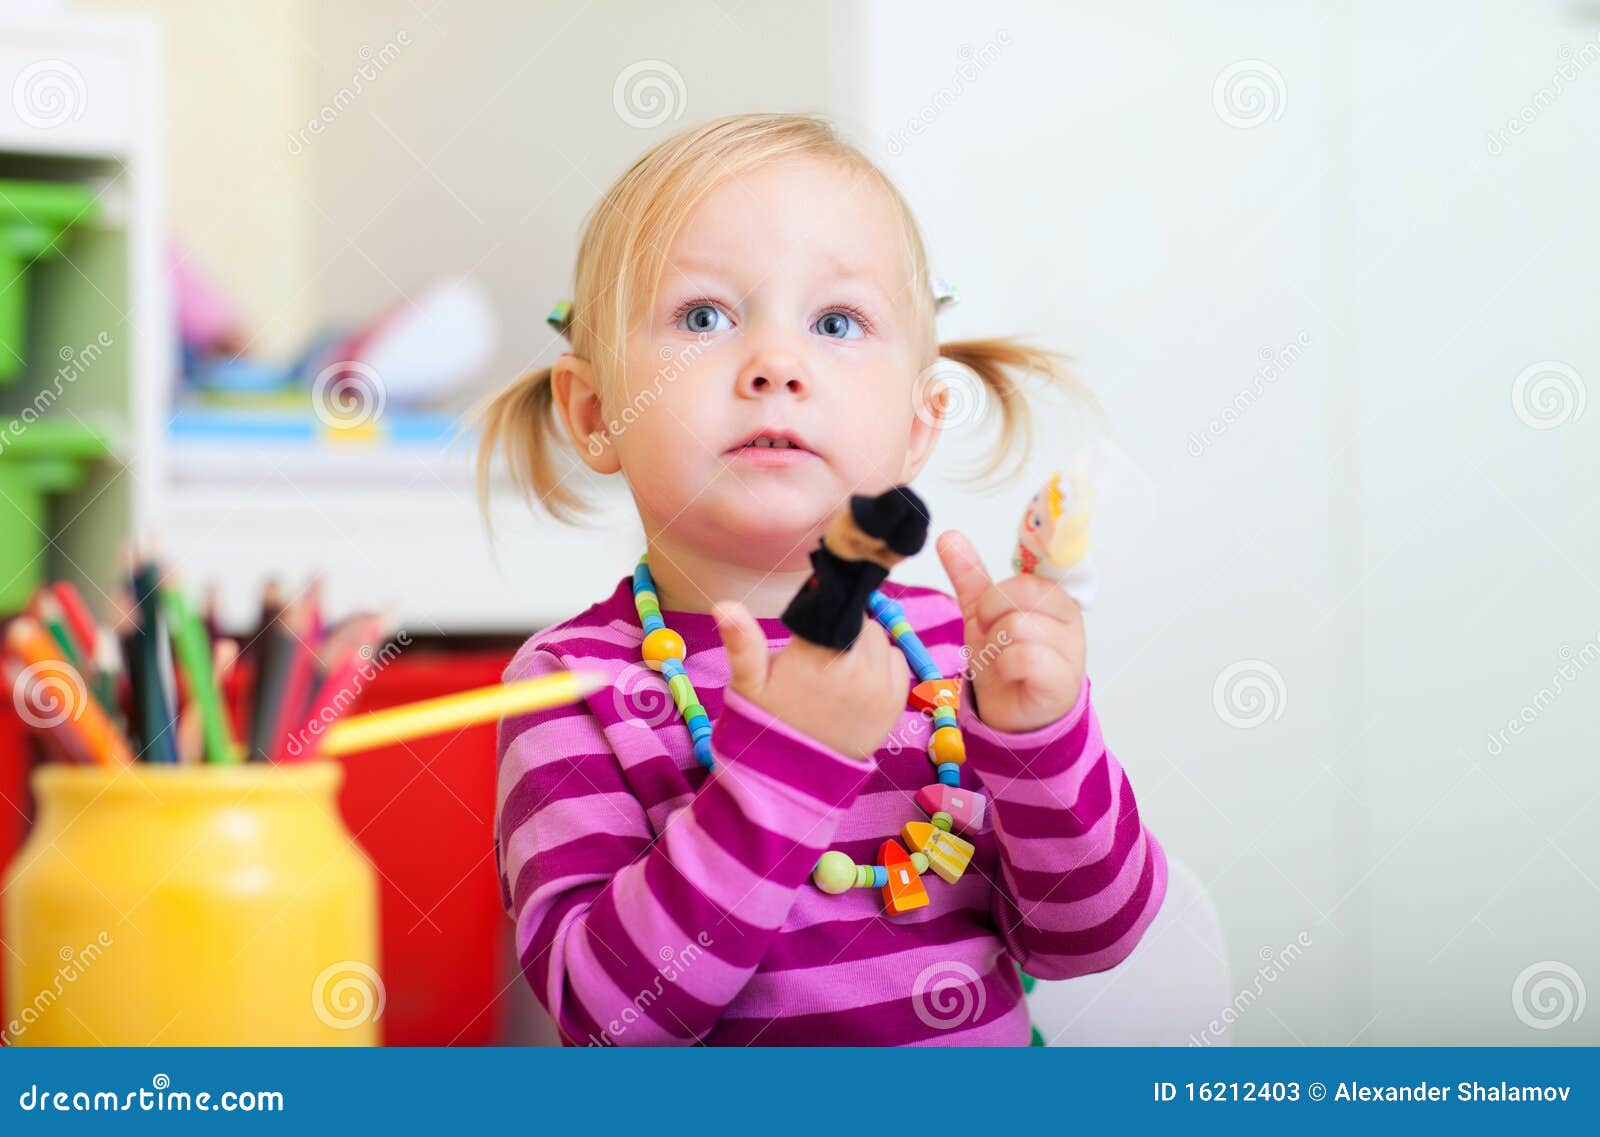 Toddler Girl Playing With Finger Toys Stock Photos Image 16212403